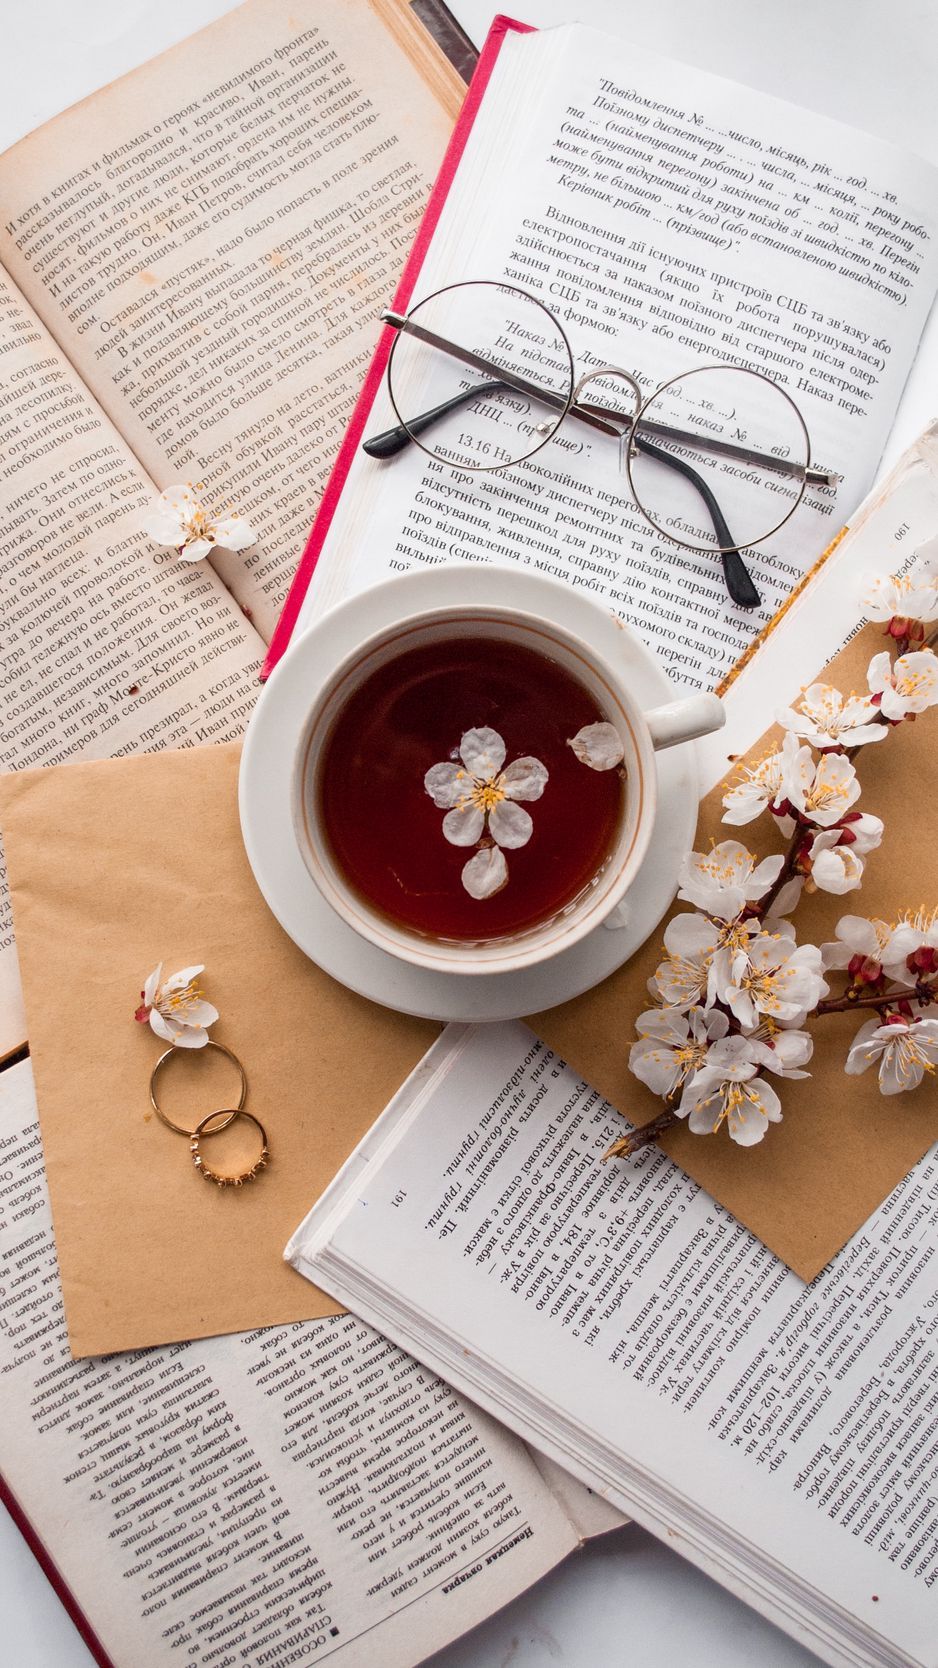 Download Wallpaper 938x1668 Books, Cup, Flowers, Glasses, Rings Iphone 8 7 6s 6 For Parallax HD Background